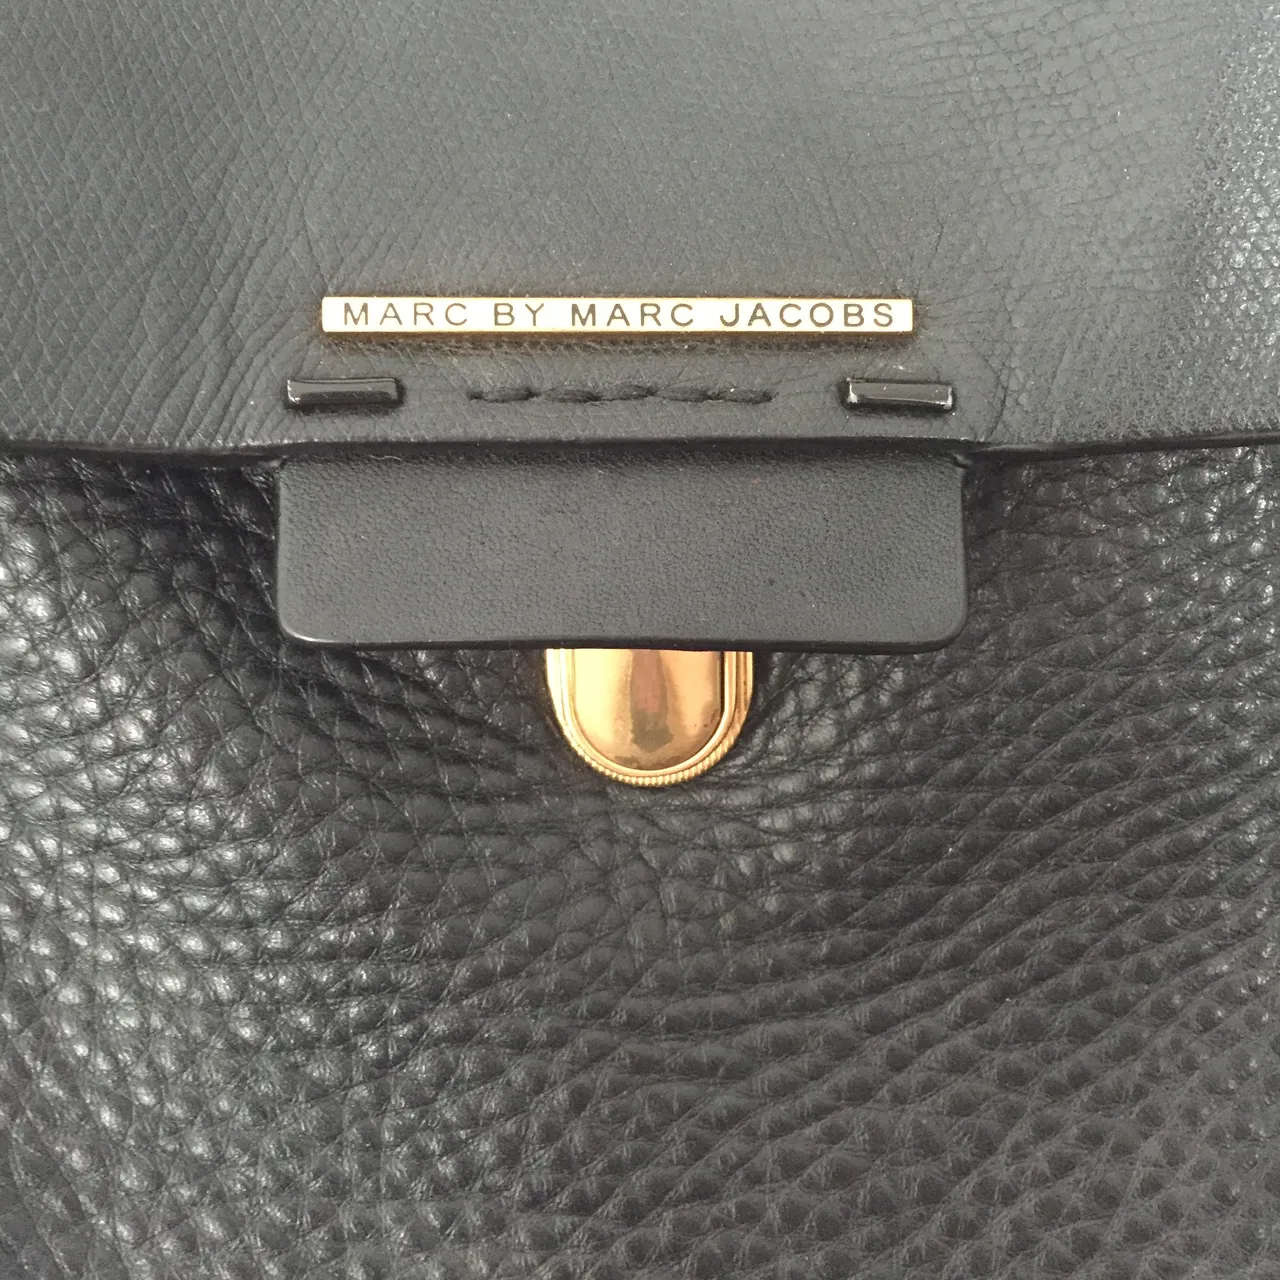 Marc by Marc Jacobs Bag photo 4